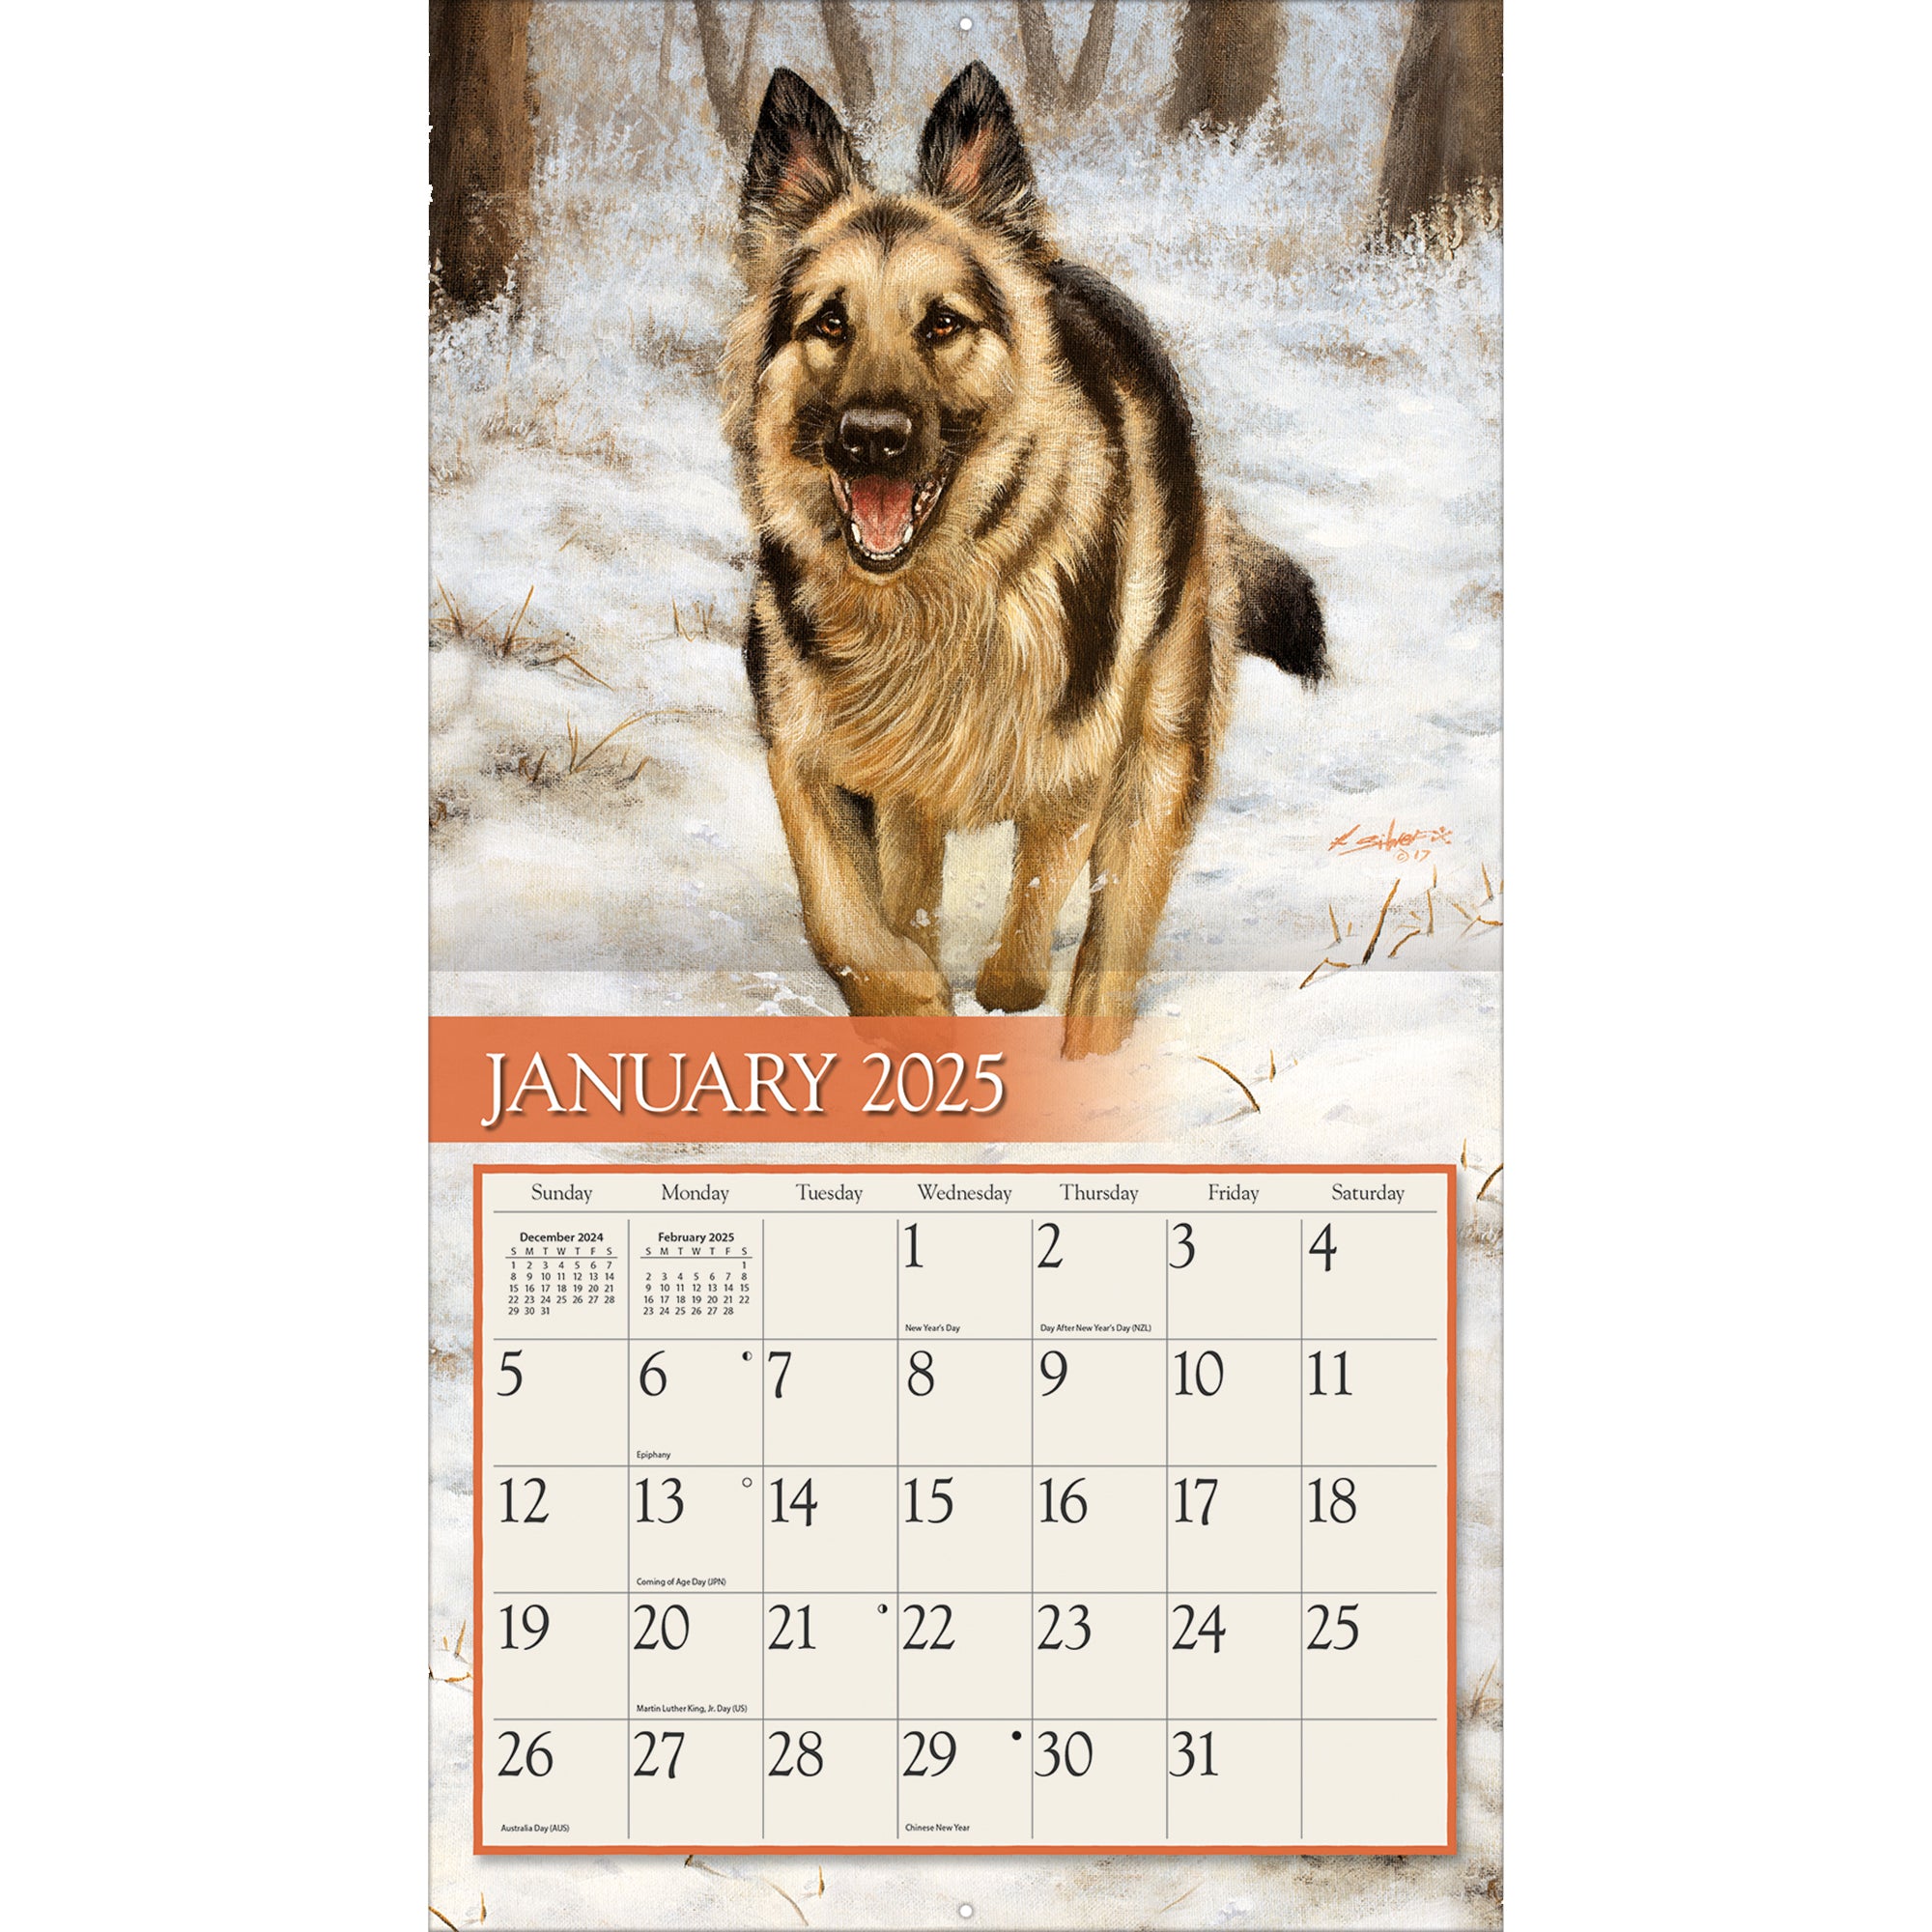 2025 LANG Love Of Dogs By John Silver - Deluxe Wall Calendar